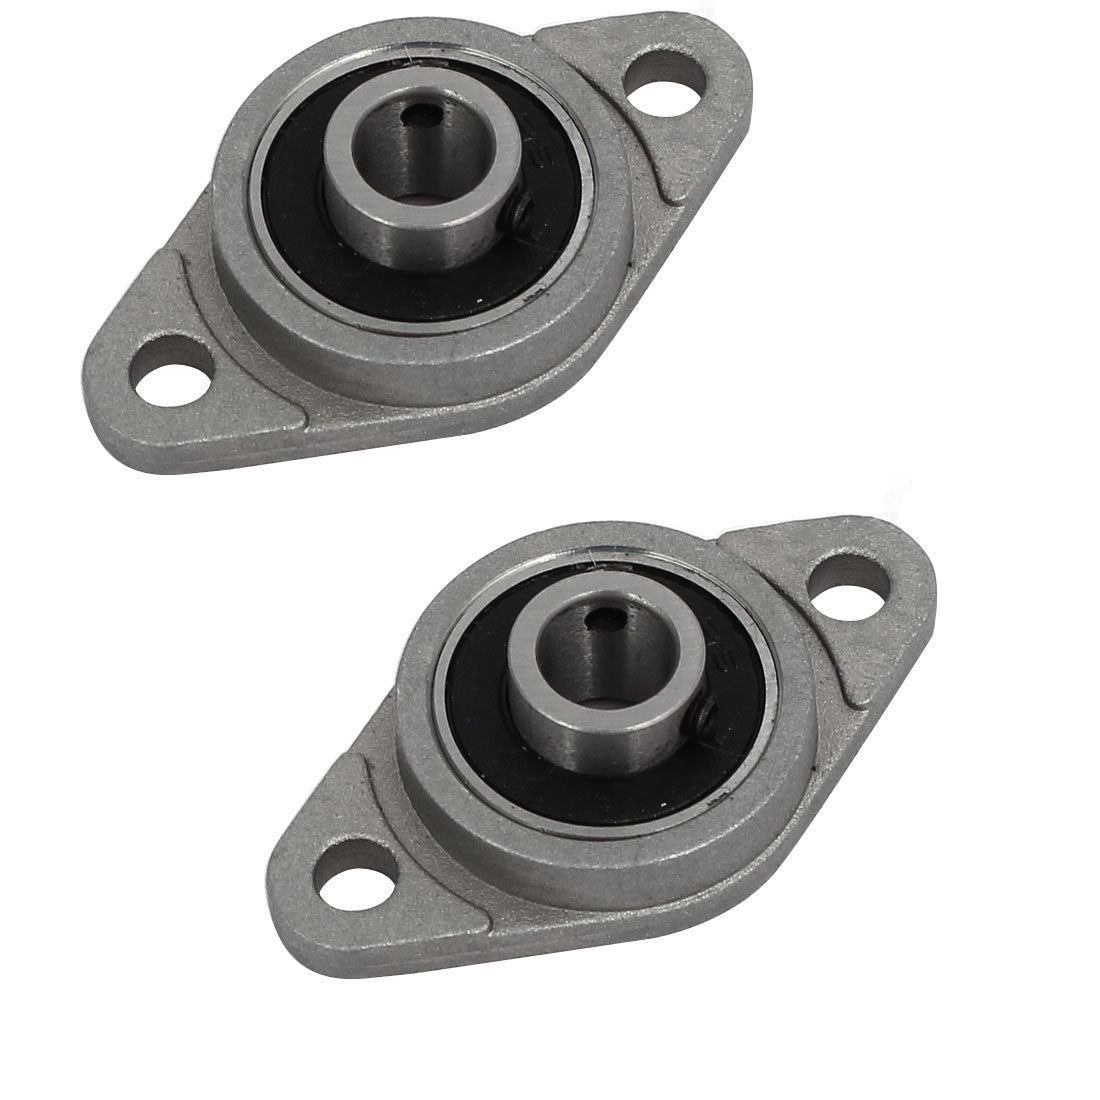 Uxcell Uxcell FL08 8mm Bore Zinc Alloy 2-Bolt Self-aligning Flange Mounted Ball Bearing 2pcs